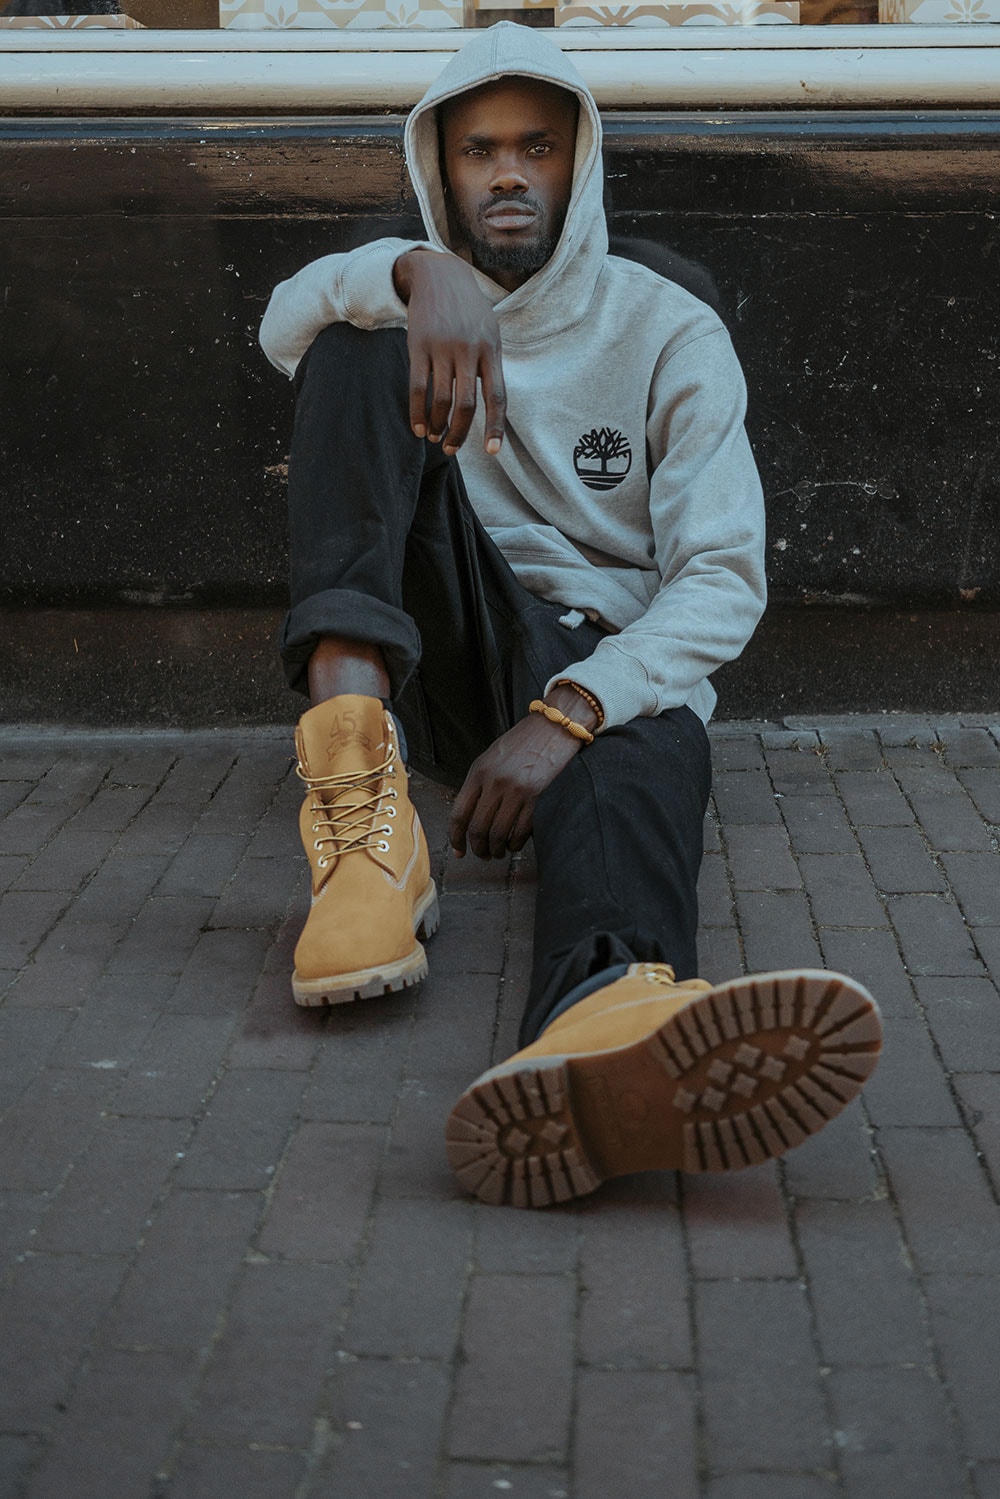 Timberland Celebrate the Icons Campaign to Commemorate 45 Years of the Yellow Boot Unsplash